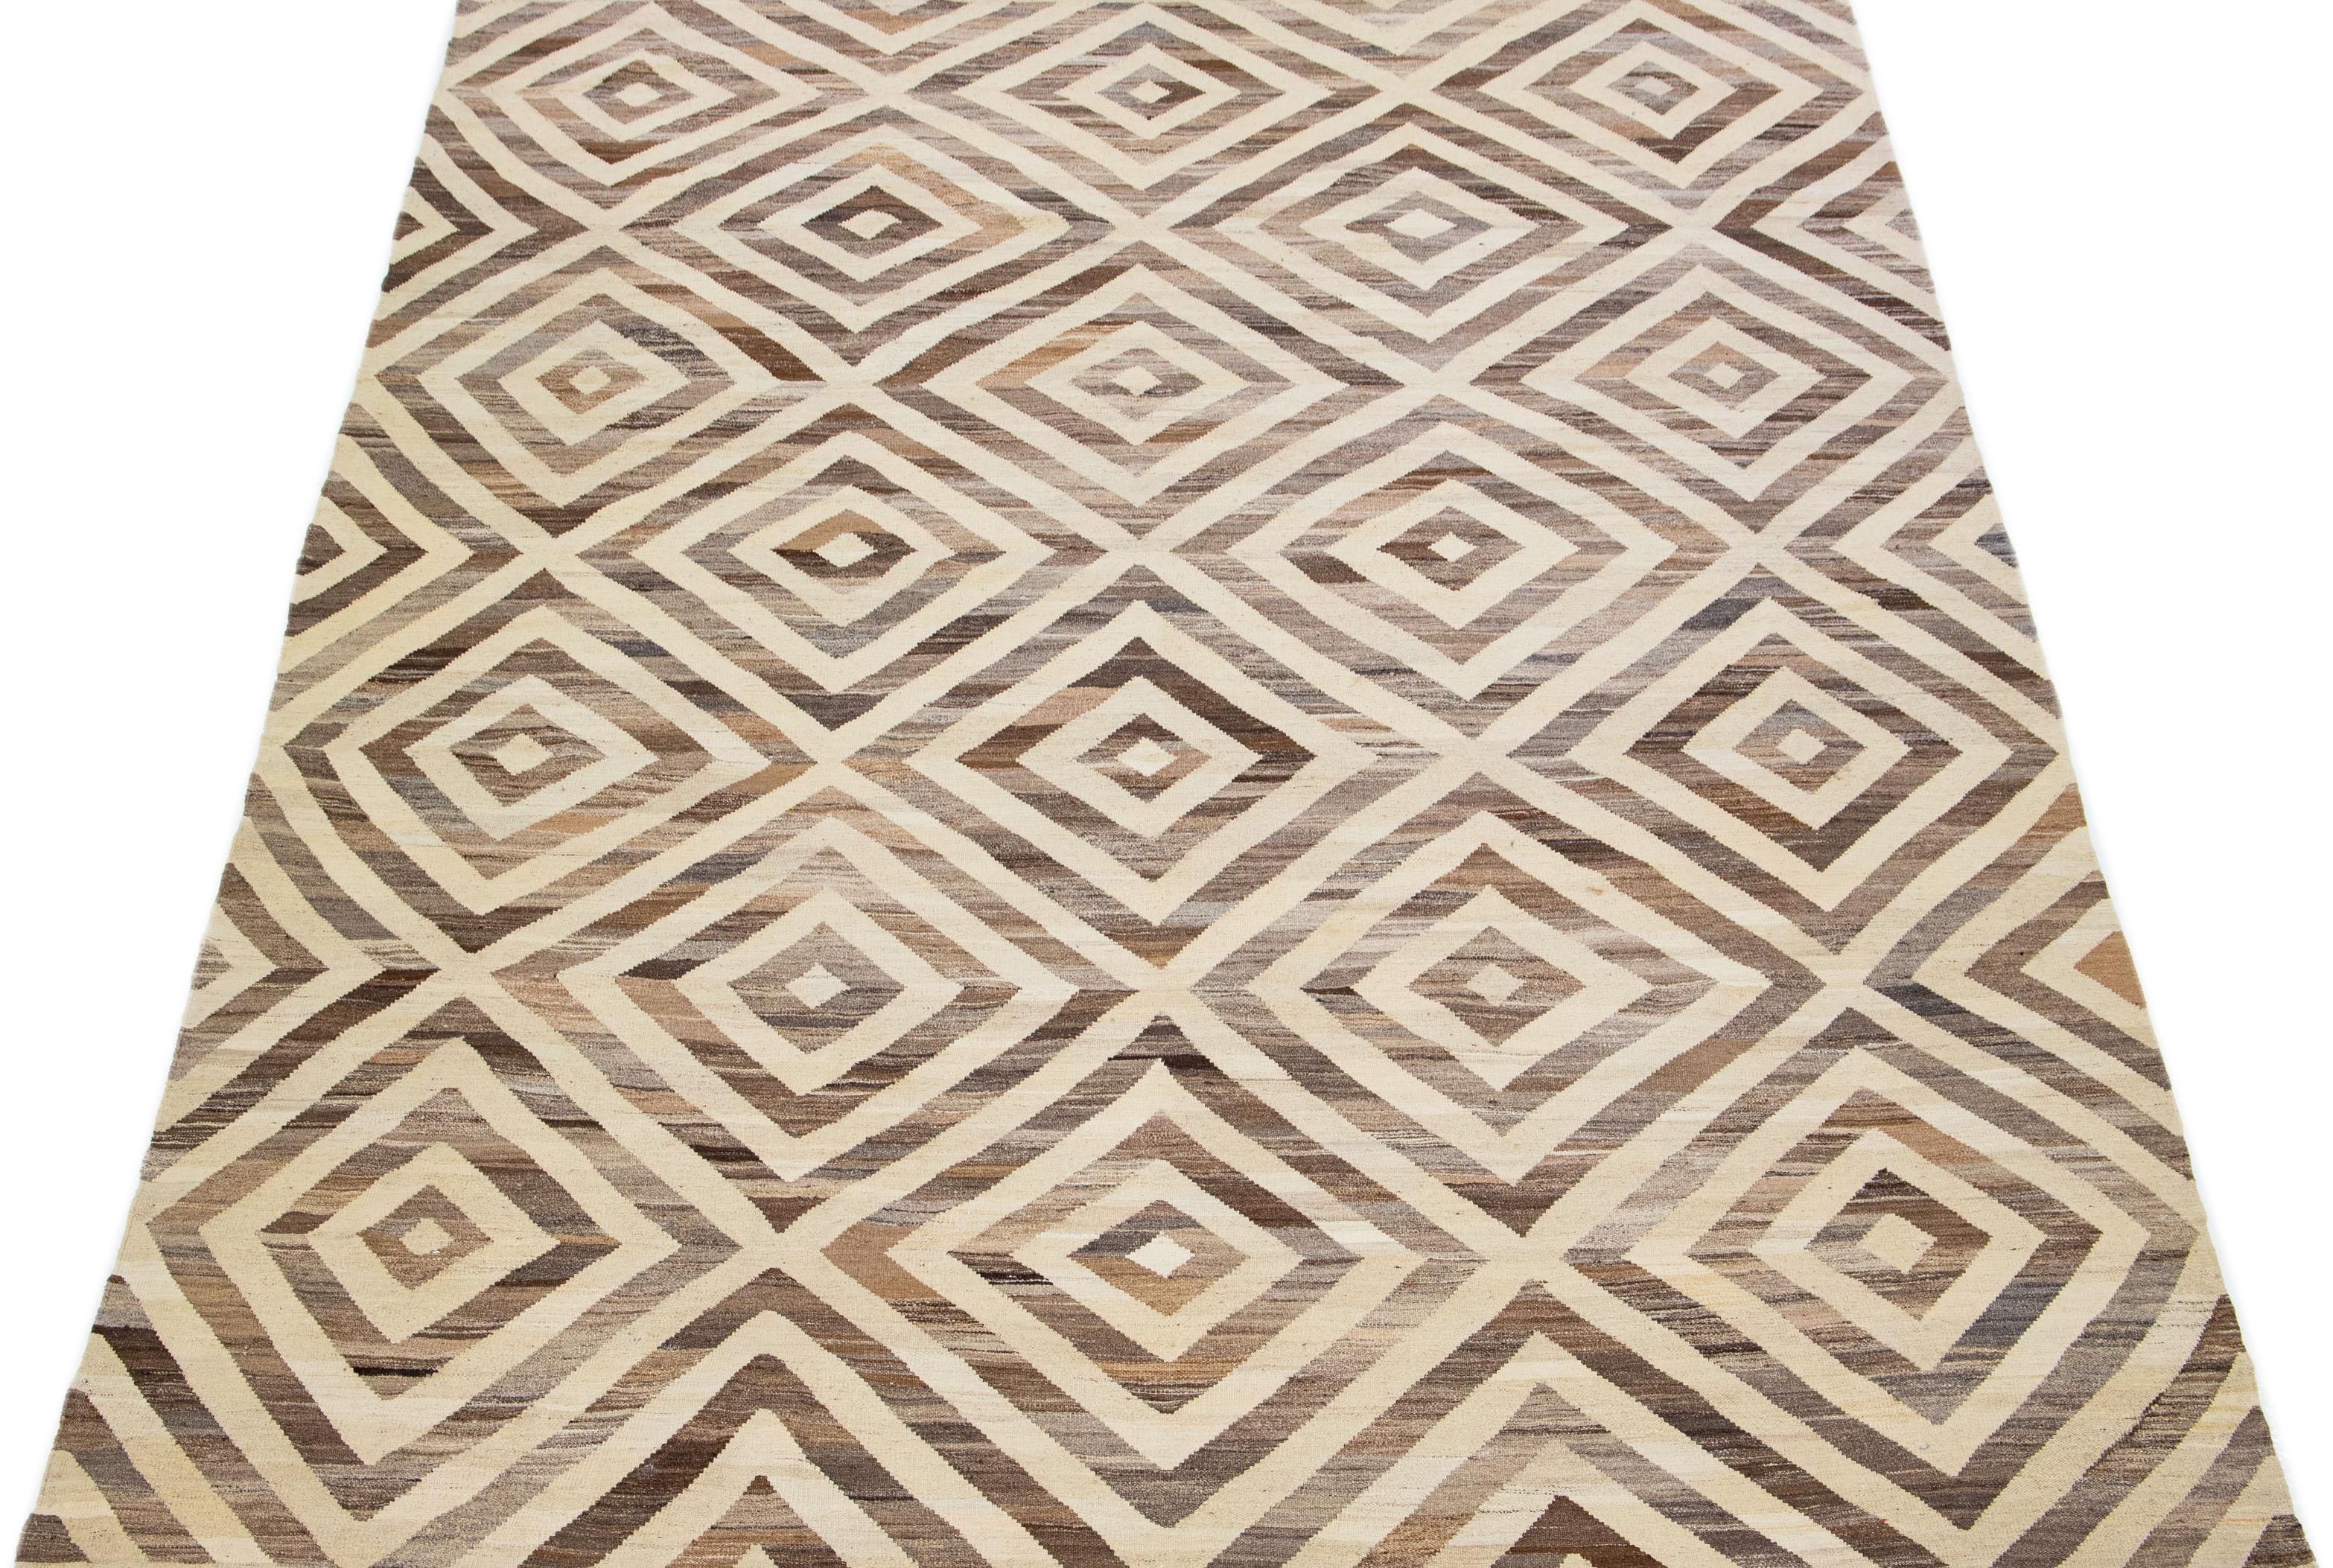 Beautiful Modern Kilim hand knotted wool rug with a geometric abstract design on a beige field and brown accents throughout the piece.

This rug measures 9'2